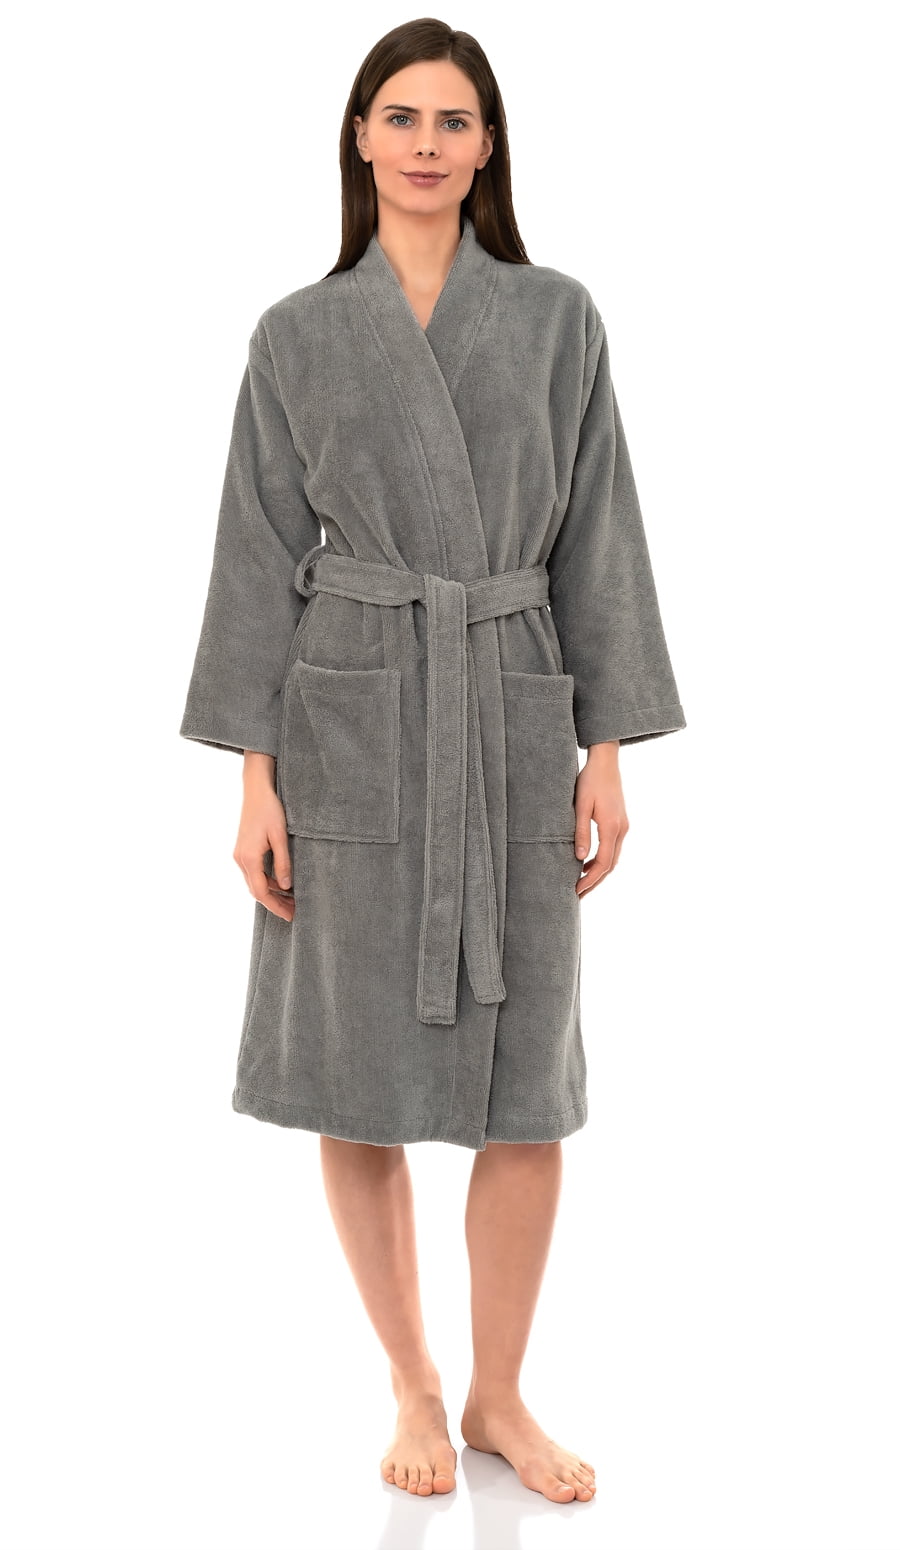 Towelselections Towelselections Women S Robe Fleece Cotton Terry